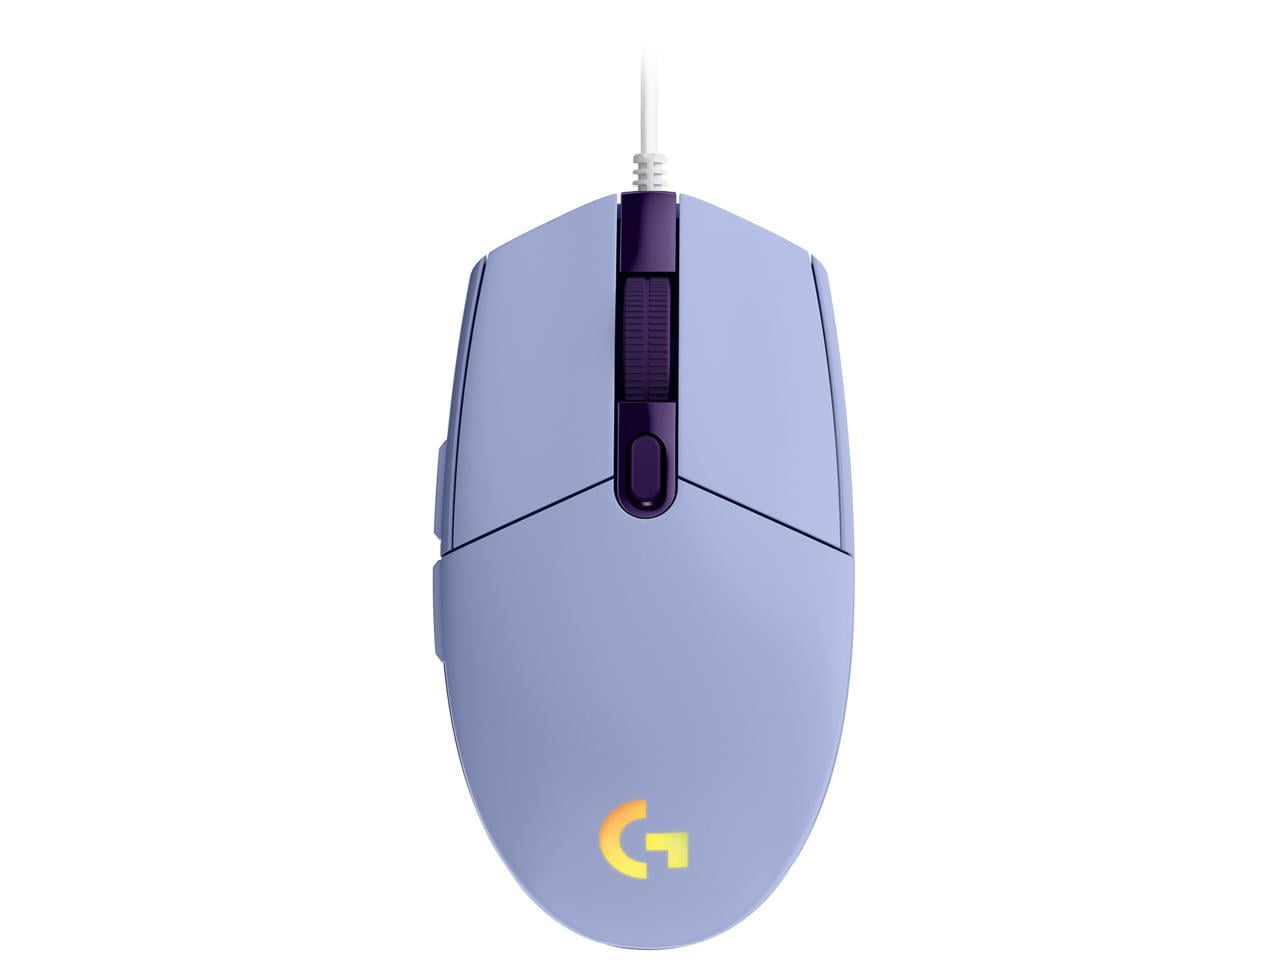 Logitech G203 Wired Gaming Mouse, 8,000 DPI, Rainbow Optical Effect  LIGHTSYNC RGB, 6 Programmable Buttons, On-Board Memory, Screen Mapping,  PC/Mac Computer and Laptop Compatible - Lilac